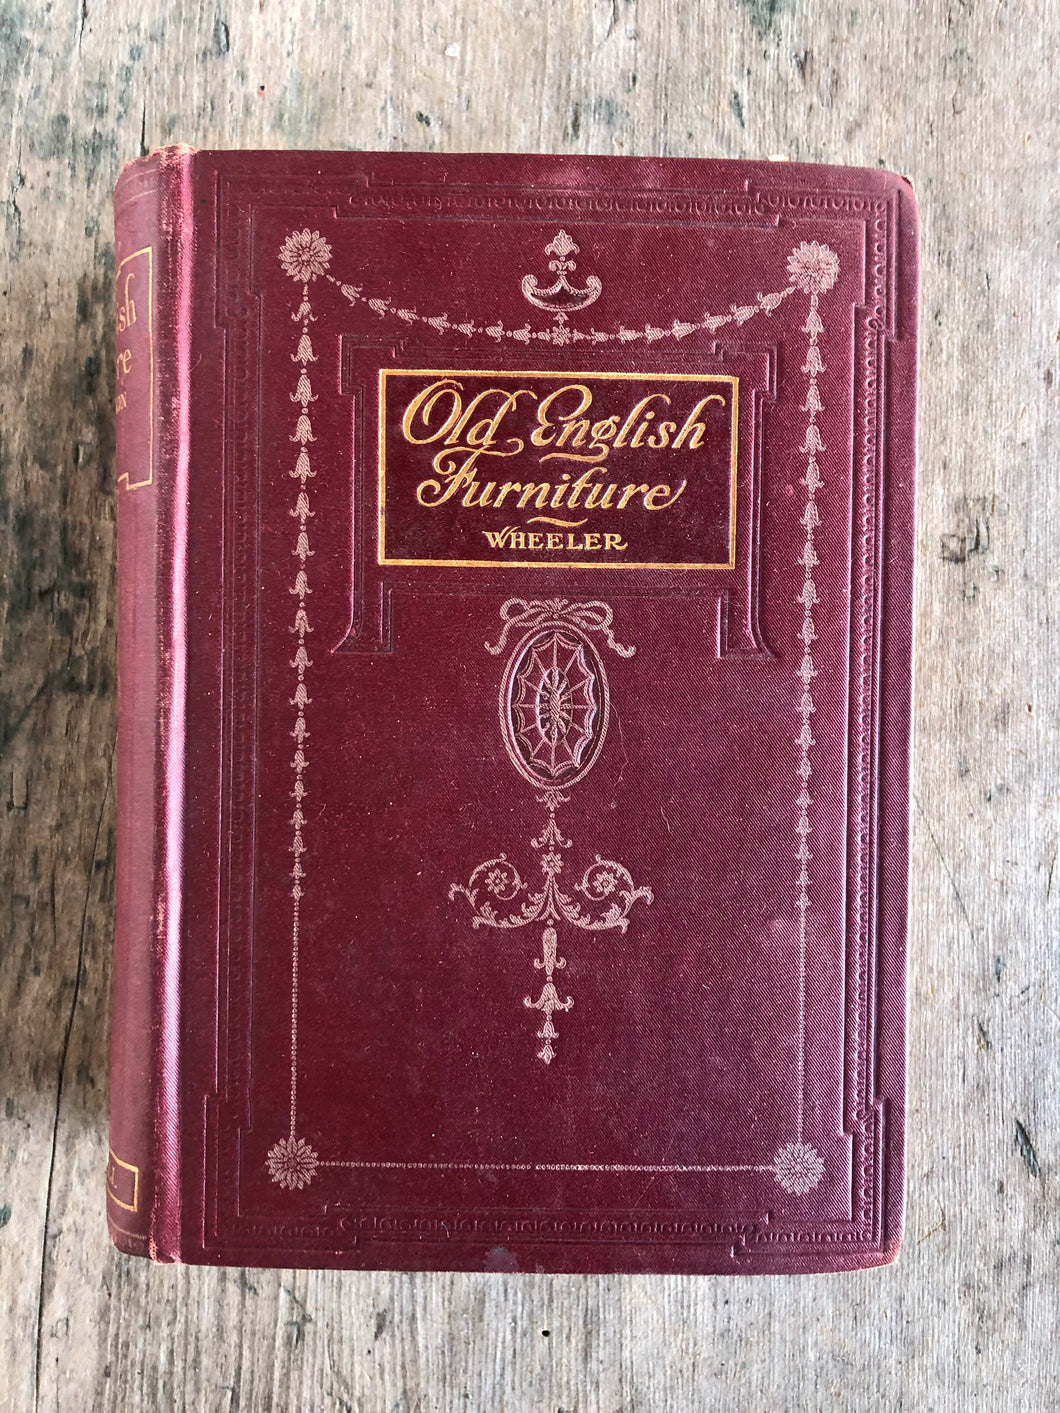 Old English Furniture From the 16th to the 19th Centuries by G. Owen Wheeler